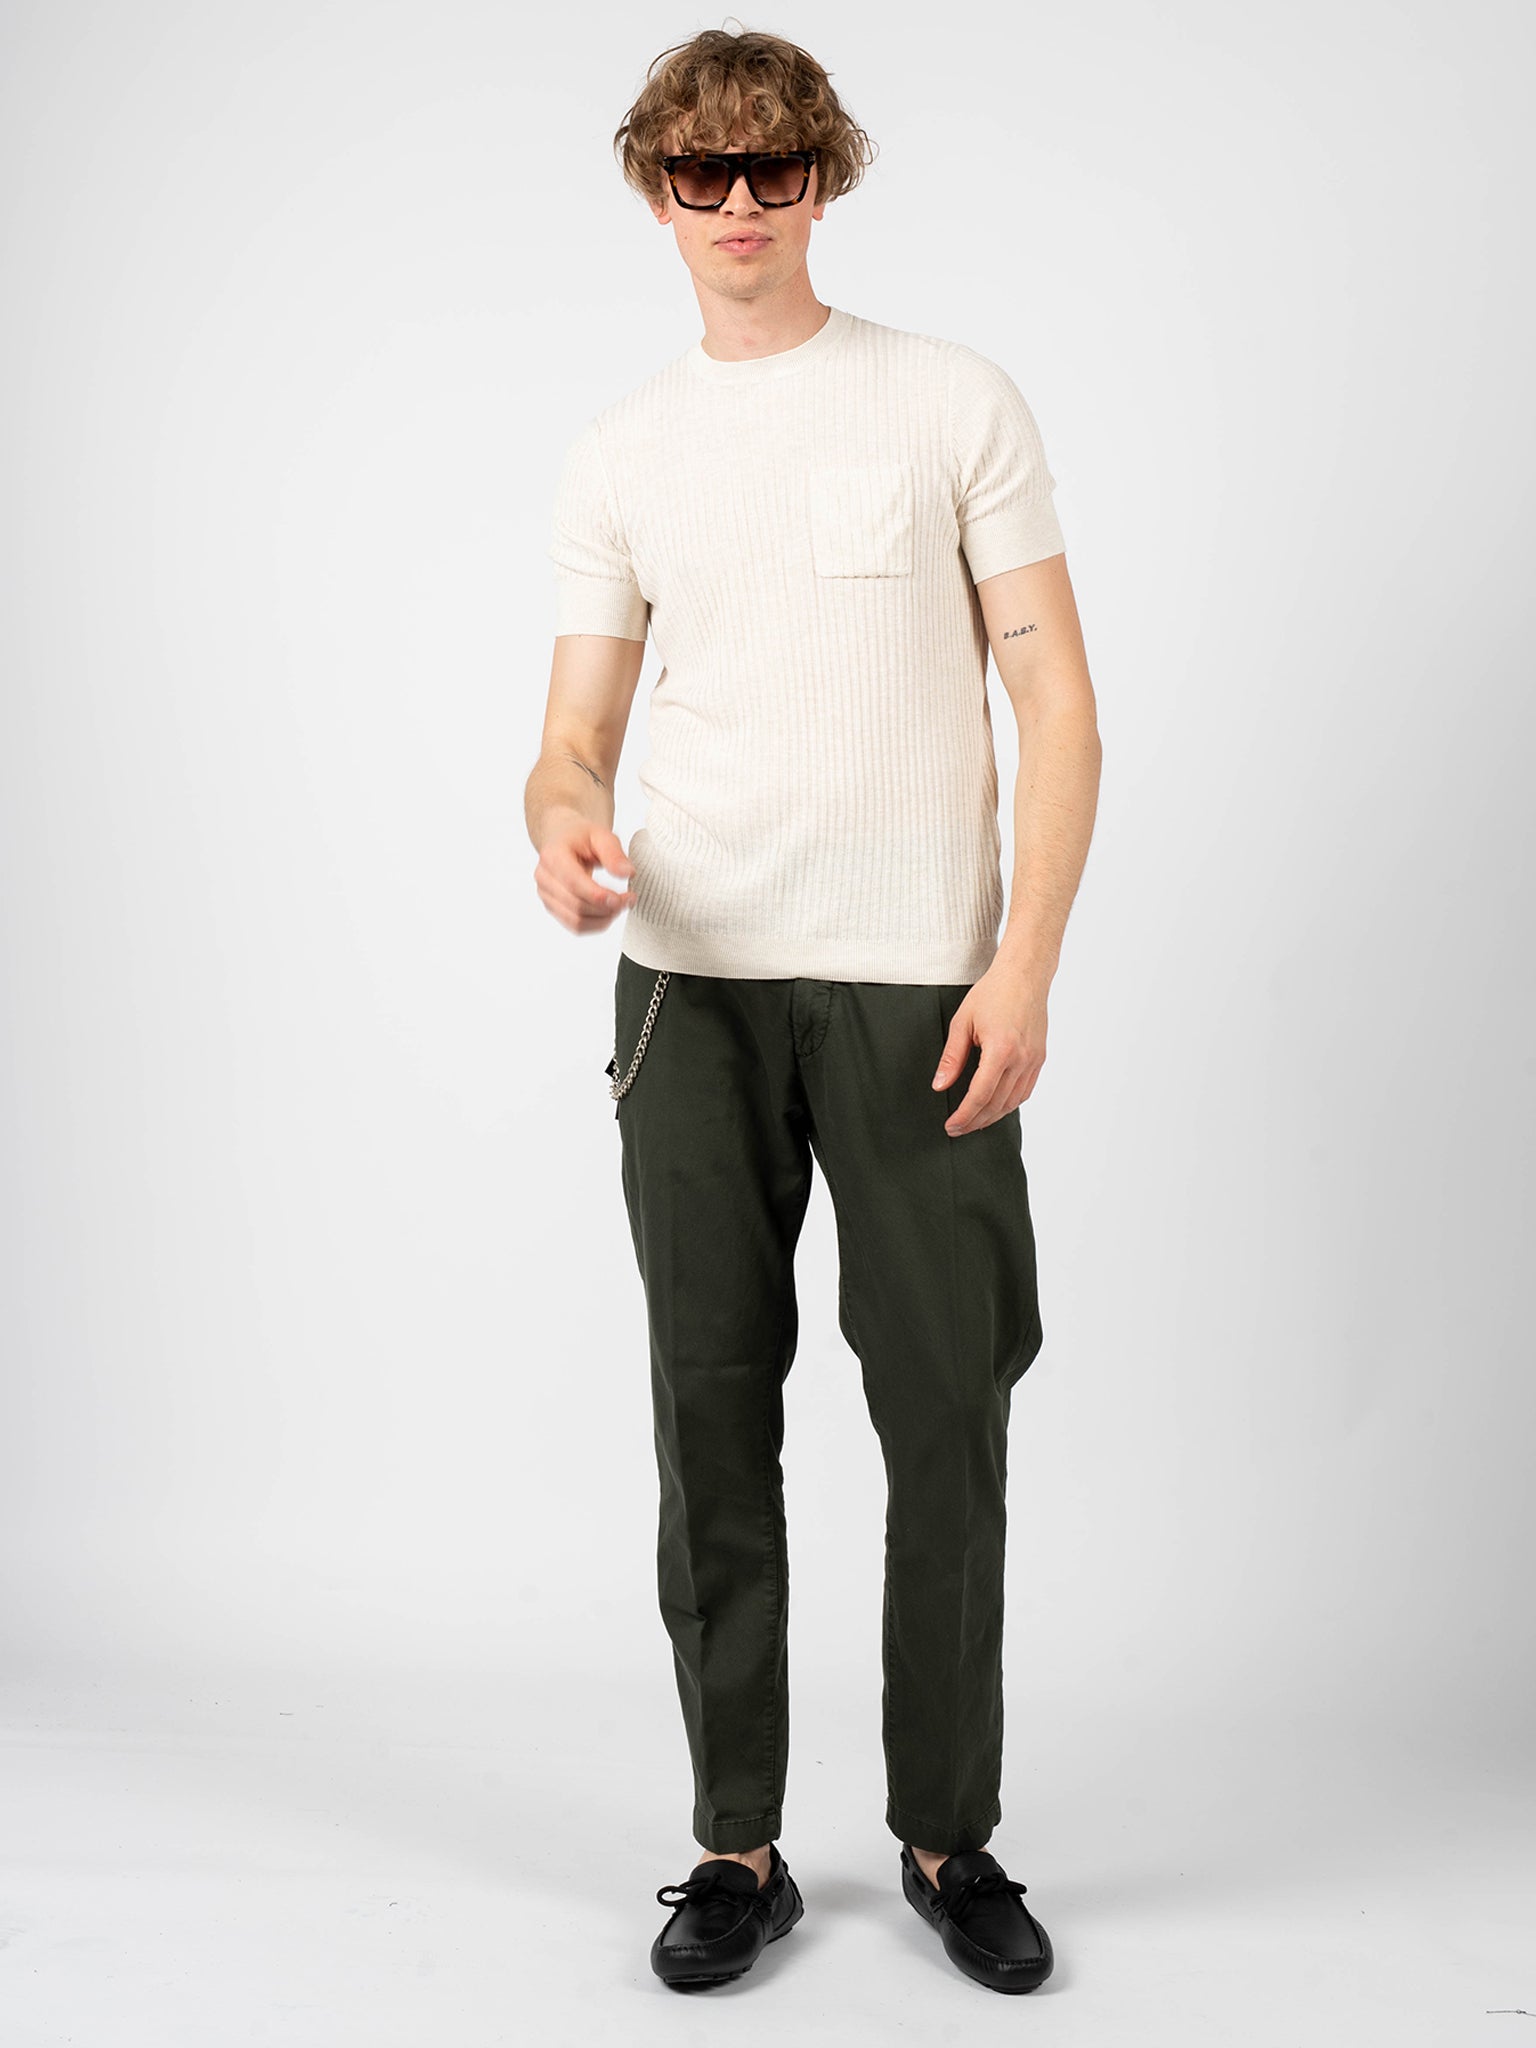 BARRET” SKINNY-FIT TROUSERS IN STRETCH WOVEN COTTON | Antony Morato